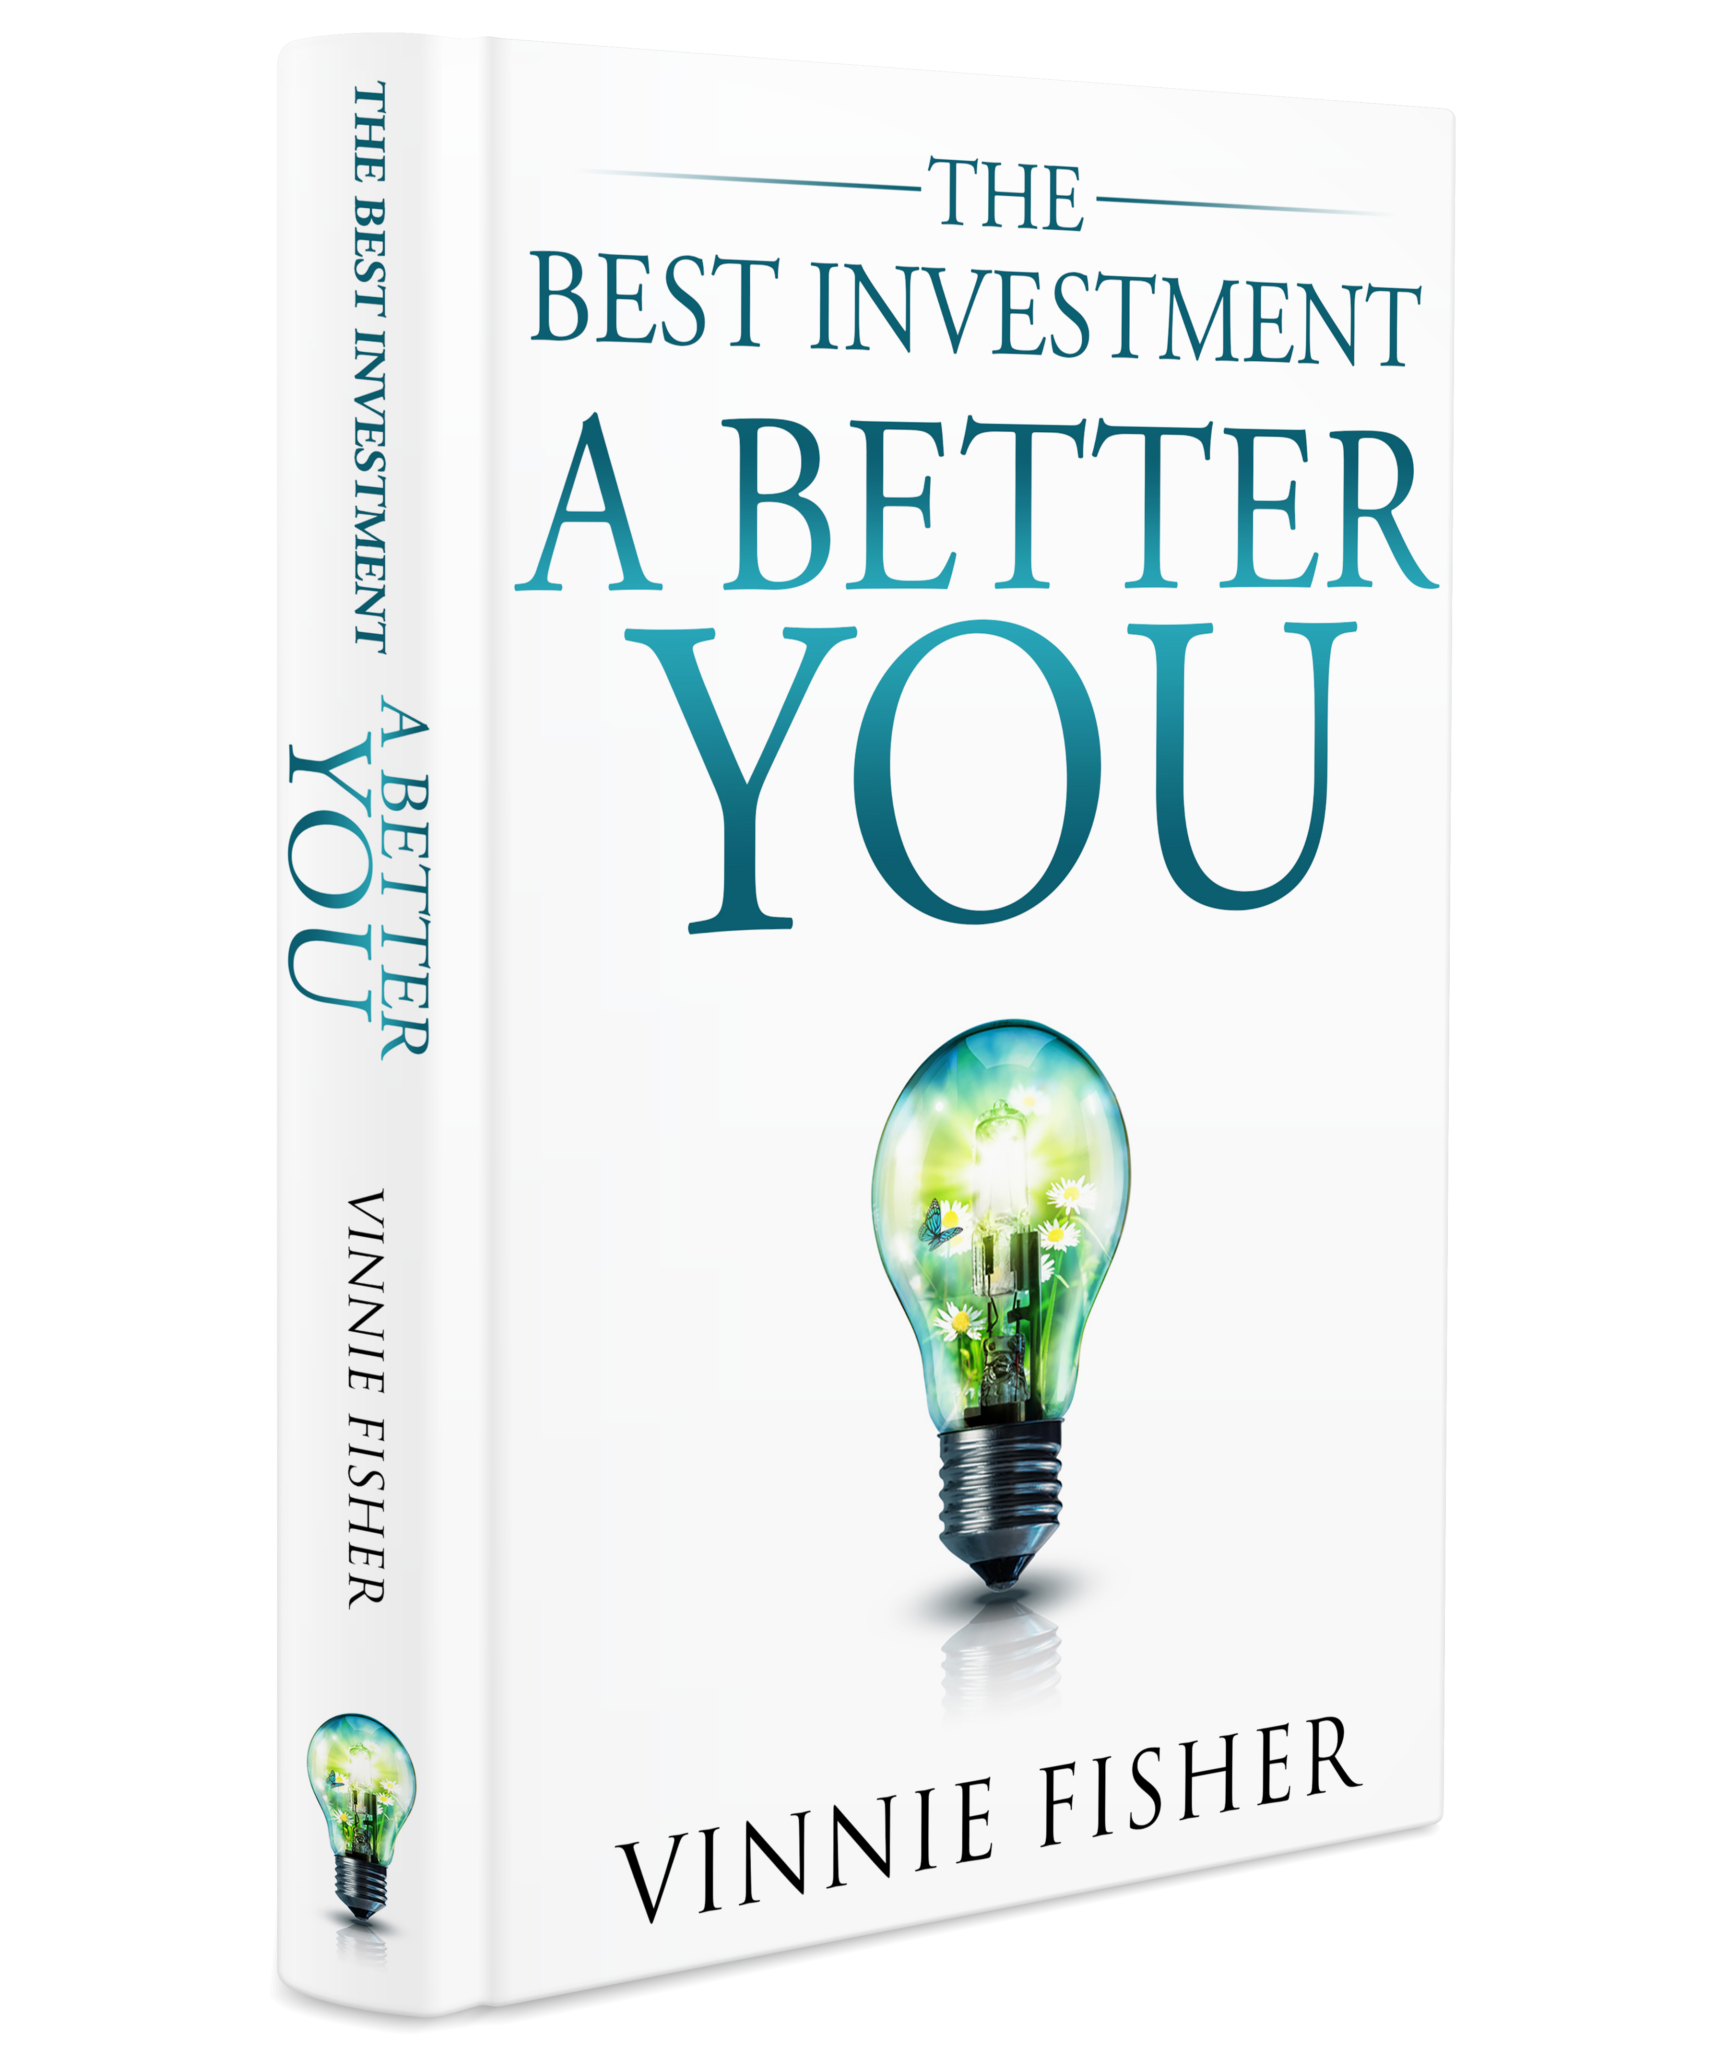 The Best Investment: A Better You by Vinnie Fisher